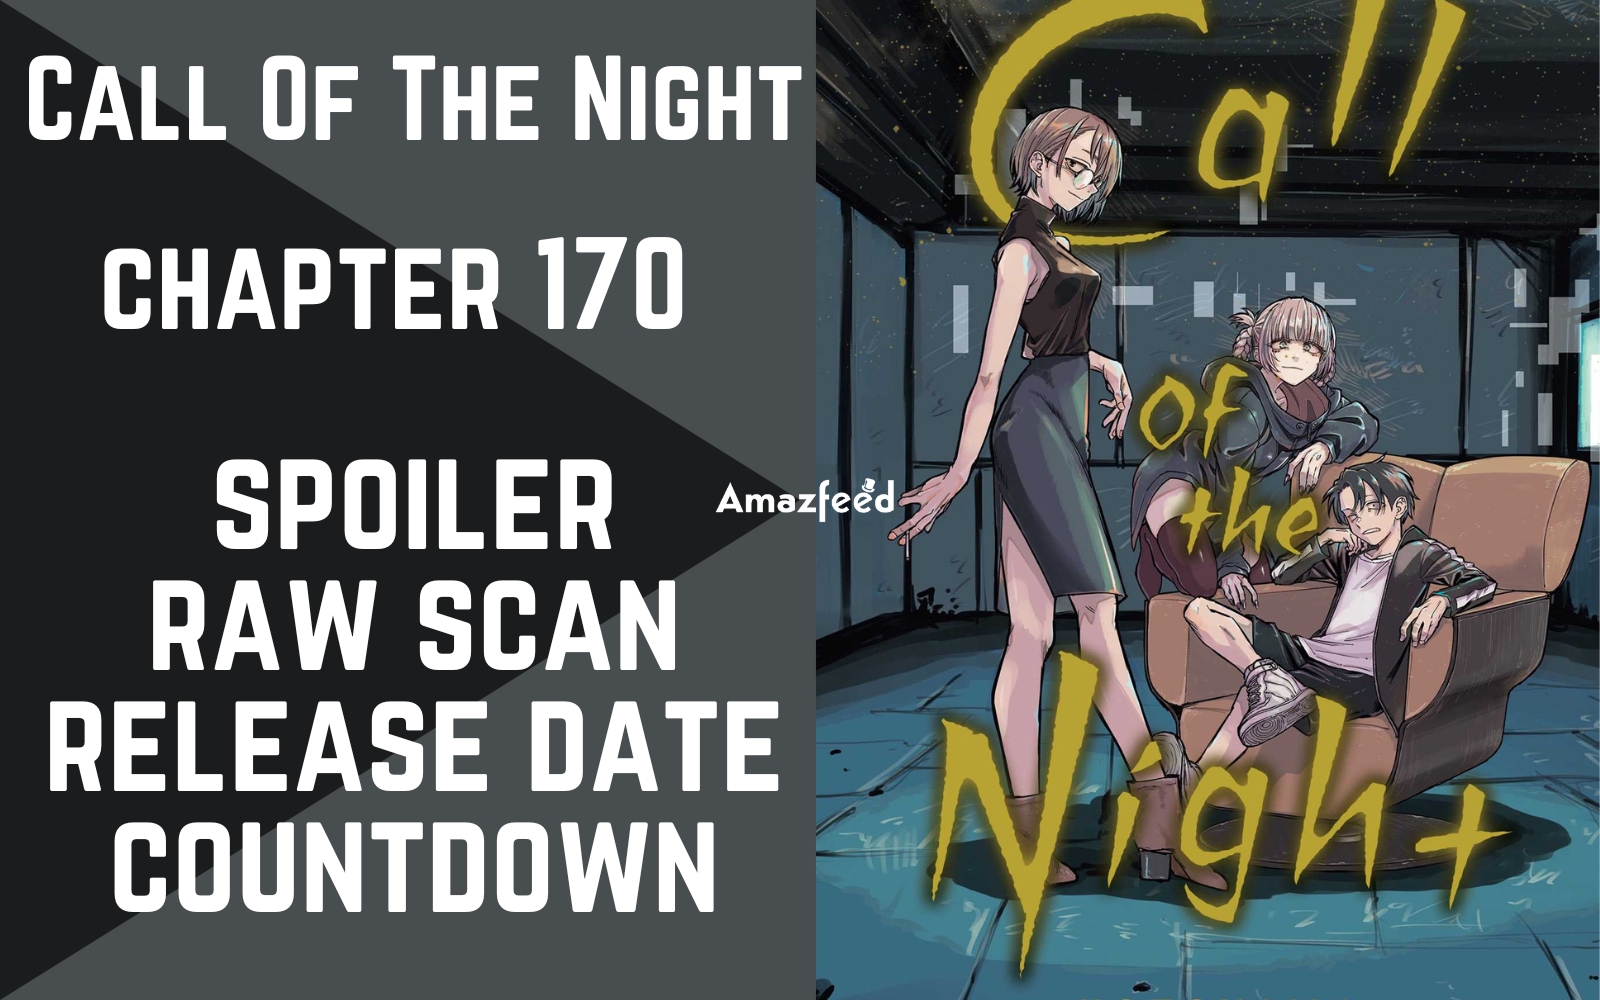 Is a season 2 for call of the night confirmed? : r/YofukashiNoUta